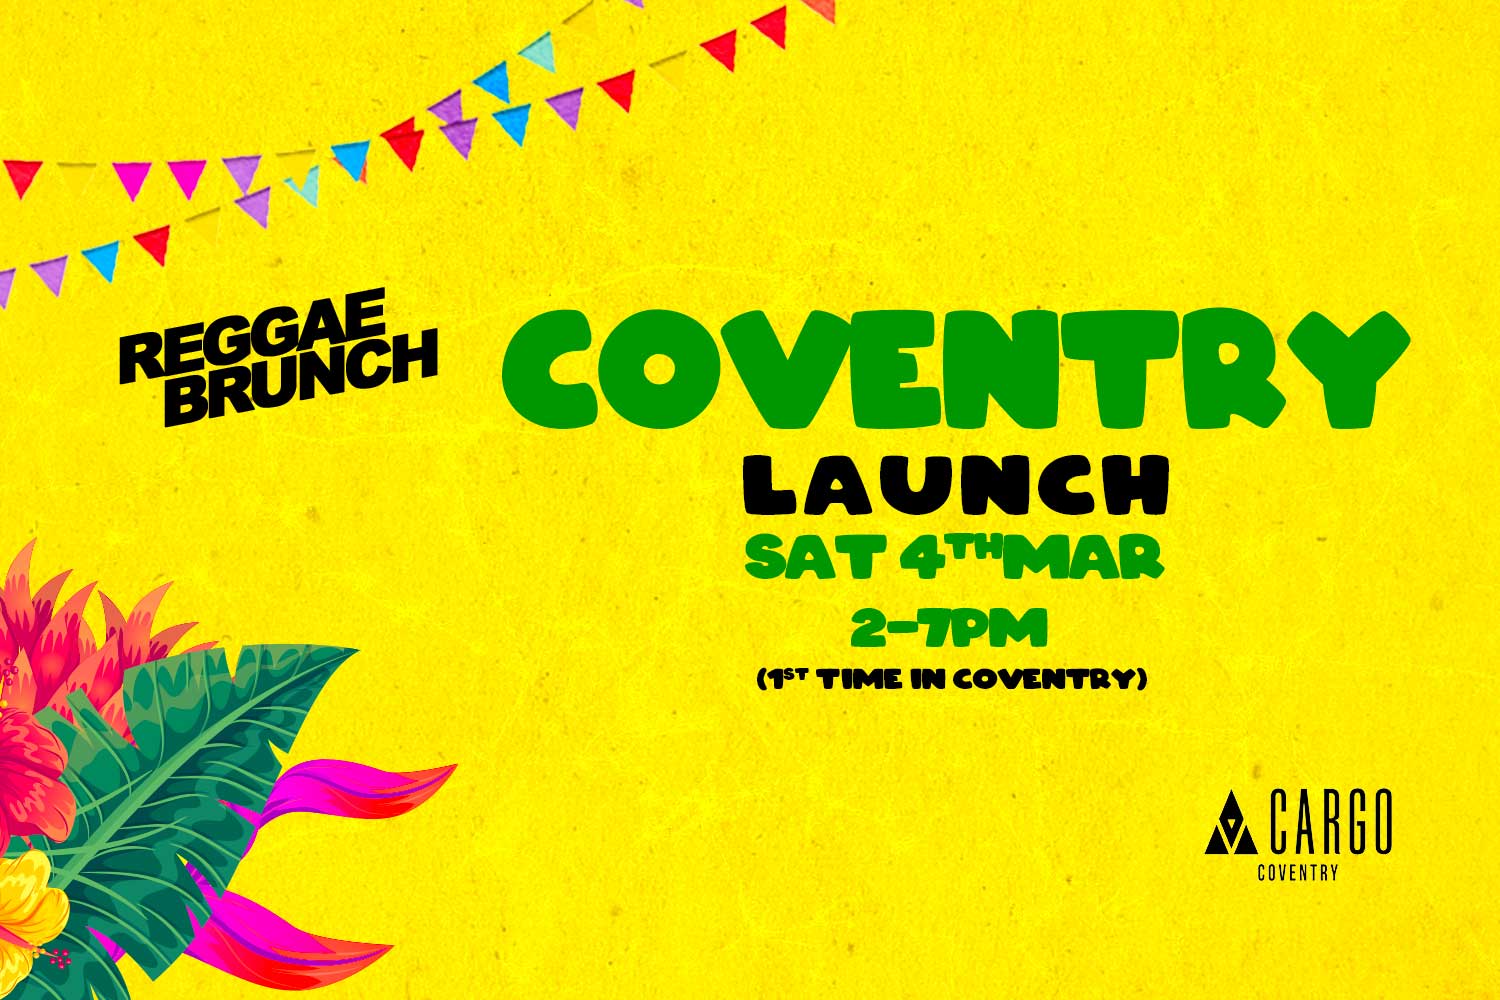 Sat, 4th Mar | Coventry Launch